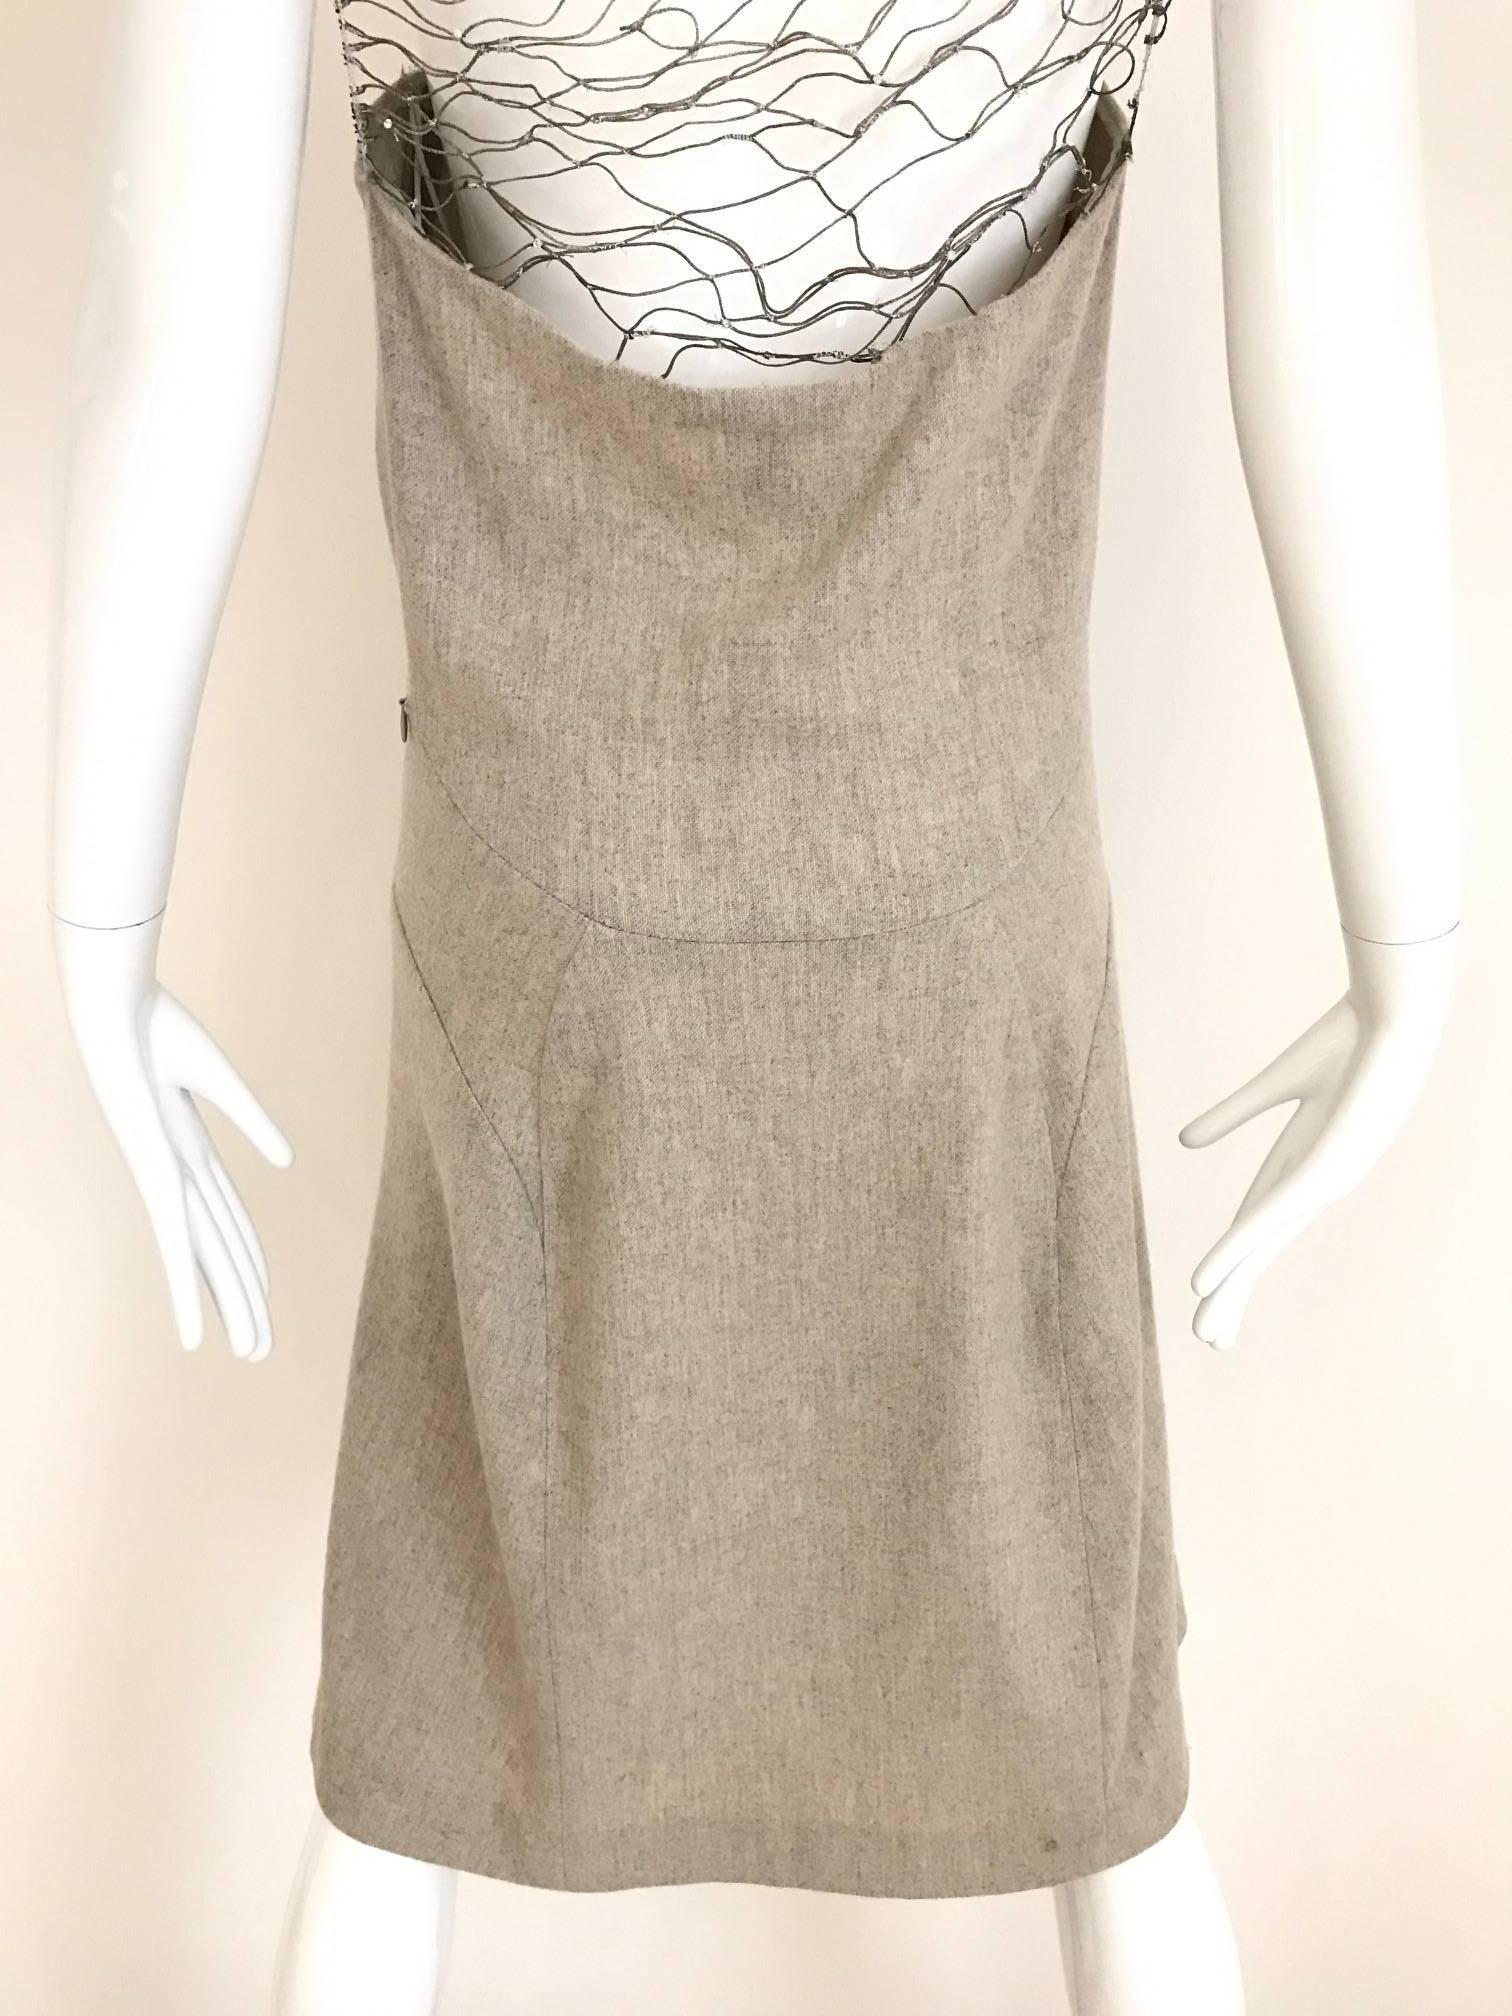 Narciso Rodriguez Grey Cashmere Lattice Cut Out Dress For Sale 1